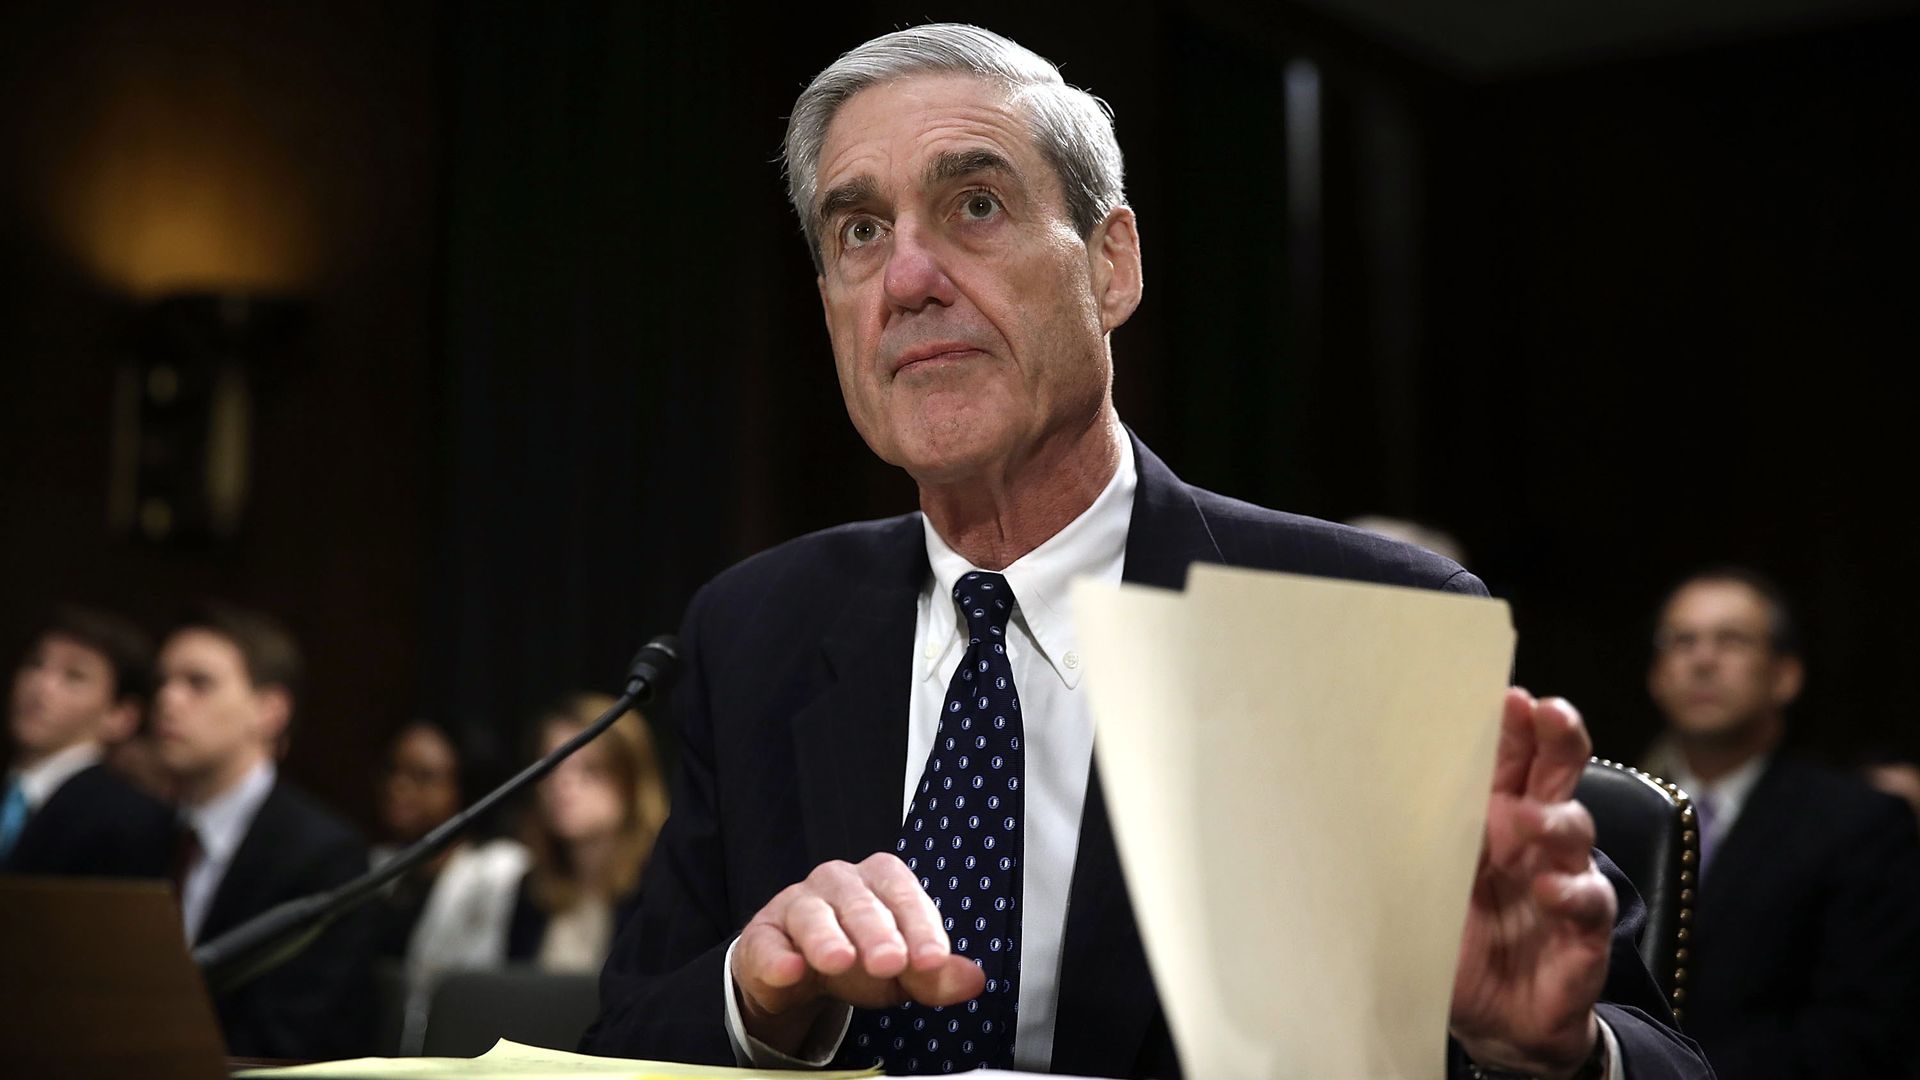 A firm has been fighting a subpoena brought by Special Counsel Robert Mueller.